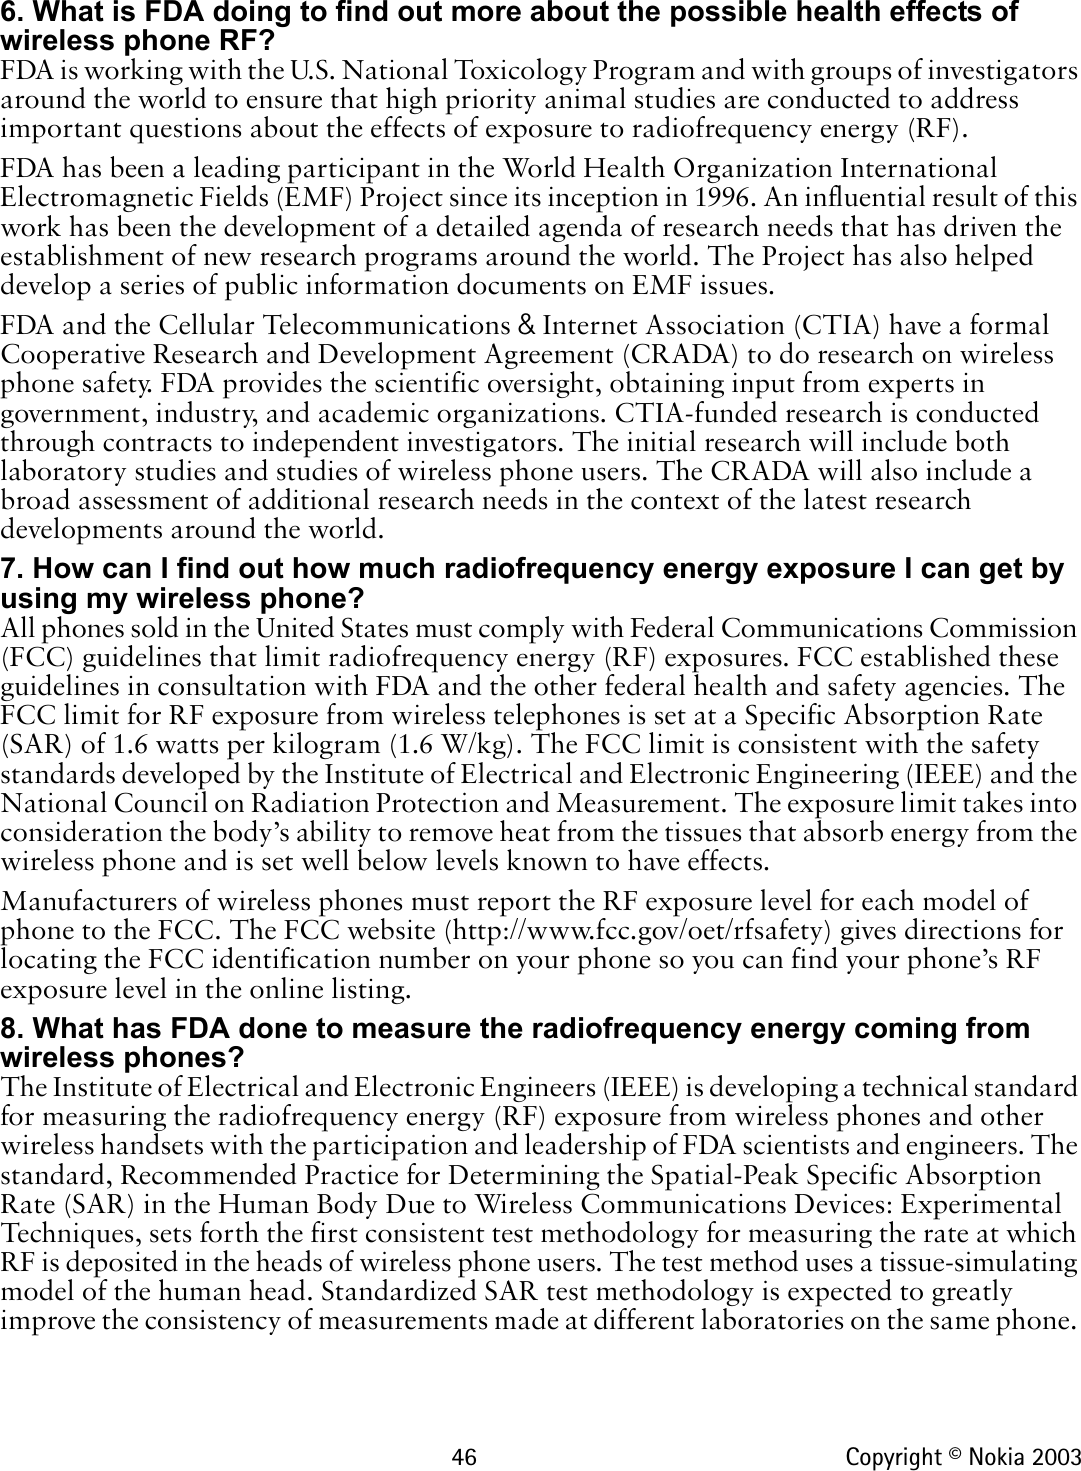 46 Copyright © Nokia 20036. What is FDA doing to find out more about the possible health effects of wireless phone RF?FDA is working with the U.S. National Toxicology Program and with groups of investigators around the world to ensure that high priority animal studies are conducted to address important questions about the effects of exposure to radiofrequency energy (RF).FDA has been a leading participant in the World Health Organization International Electromagnetic Fields (EMF) Project since its inception in 1996. An influential result of this work has been the development of a detailed agenda of research needs that has driven the establishment of new research programs around the world. The Project has also helped develop a series of public information documents on EMF issues.FDA and the Cellular Telecommunications &amp; Internet Association (CTIA) have a formal Cooperative Research and Development Agreement (CRADA) to do research on wireless phone safety. FDA provides the scientific oversight, obtaining input from experts in government, industry, and academic organizations. CTIA-funded research is conducted through contracts to independent investigators. The initial research will include both laboratory studies and studies of wireless phone users. The CRADA will also include a broad assessment of additional research needs in the context of the latest research developments around the world.7. How can I find out how much radiofrequency energy exposure I can get by using my wireless phone?All phones sold in the United States must comply with Federal Communications Commission (FCC) guidelines that limit radiofrequency energy (RF) exposures. FCC established these guidelines in consultation with FDA and the other federal health and safety agencies. The FCC limit for RF exposure from wireless telephones is set at a Specific Absorption Rate (SAR) of 1.6 watts per kilogram (1.6 W/kg). The FCC limit is consistent with the safety standards developed by the Institute of Electrical and Electronic Engineering (IEEE) and the National Council on Radiation Protection and Measurement. The exposure limit takes into consideration the body’s ability to remove heat from the tissues that absorb energy from the wireless phone and is set well below levels known to have effects.Manufacturers of wireless phones must report the RF exposure level for each model of phone to the FCC. The FCC website (http://www.fcc.gov/oet/rfsafety) gives directions for locating the FCC identification number on your phone so you can find your phone’s RF exposure level in the online listing.8. What has FDA done to measure the radiofrequency energy coming from   wireless phones?The Institute of Electrical and Electronic Engineers (IEEE) is developing a technical standard for measuring the radiofrequency energy (RF) exposure from wireless phones and other wireless handsets with the participation and leadership of FDA scientists and engineers. The standard, Recommended Practice for Determining the Spatial-Peak Specific Absorption Rate (SAR) in the Human Body Due to Wireless Communications Devices: Experimental Techniques, sets forth the first consistent test methodology for measuring the rate at which RF is deposited in the heads of wireless phone users. The test method uses a tissue-simulating model of the human head. Standardized SAR test methodology is expected to greatly improve the consistency of measurements made at different laboratories on the same phone. 